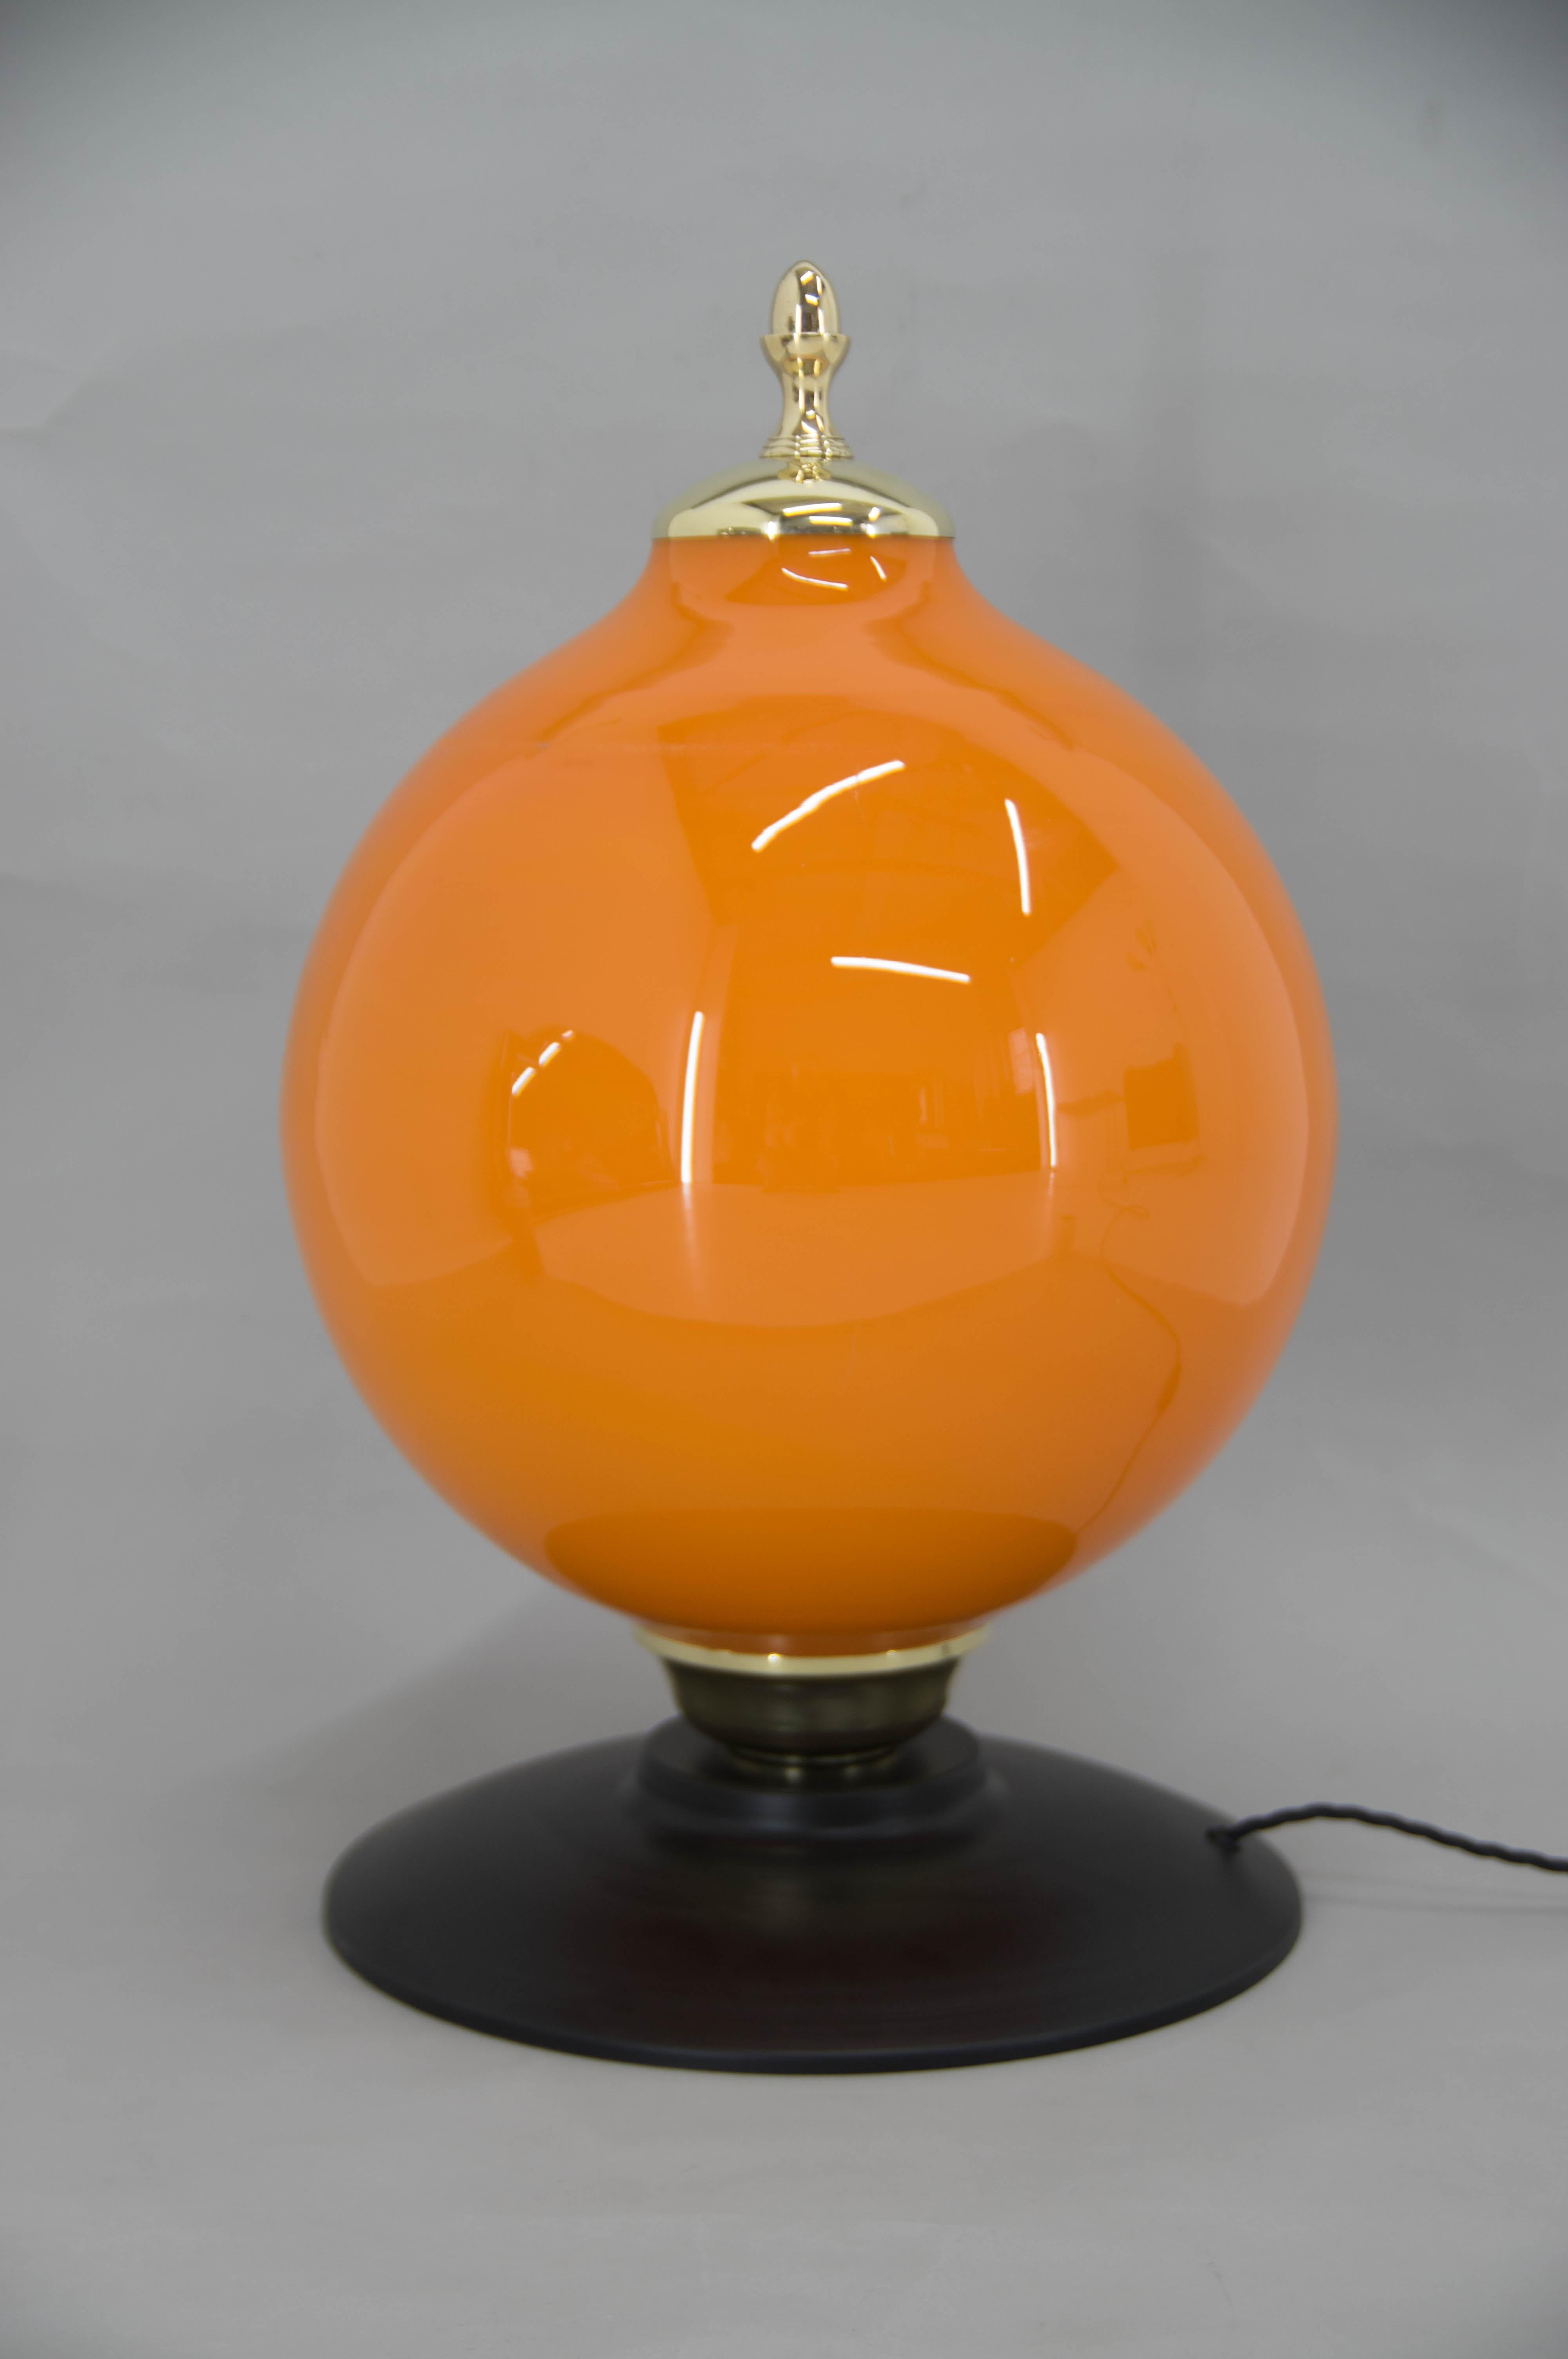 Big orange glass table or floor lamp.
Black plastic base.
Glass shade with some scratches and chips visible on pictures.
Rewired: 1x100W, E25-E27 bulb.
US plug adapter included.